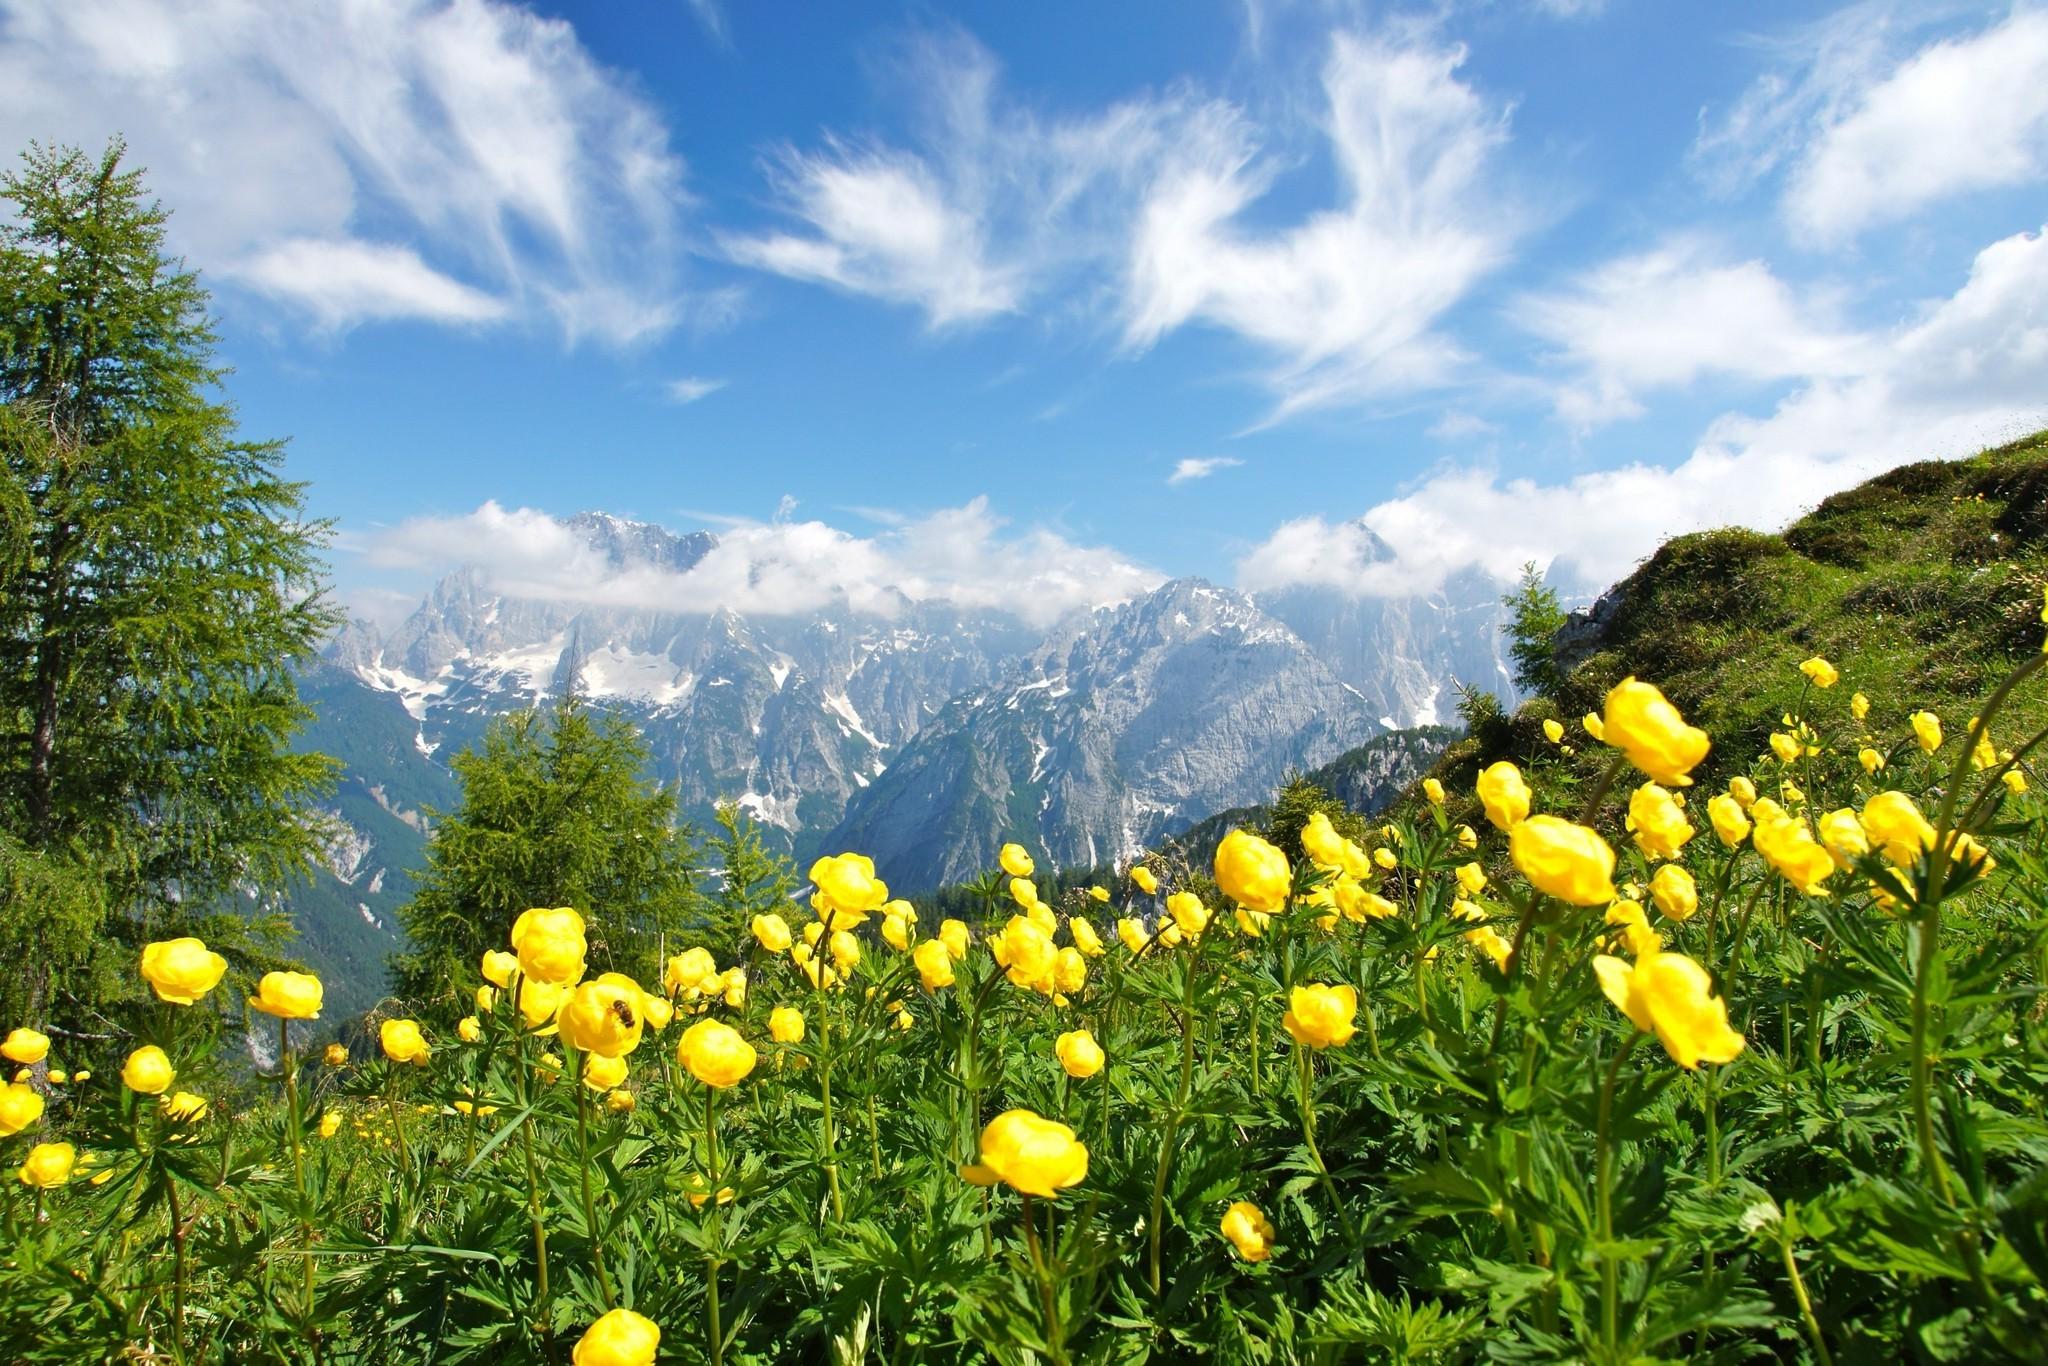 photography, Nature, Landscape, Summer, Wildflowers, Mountains